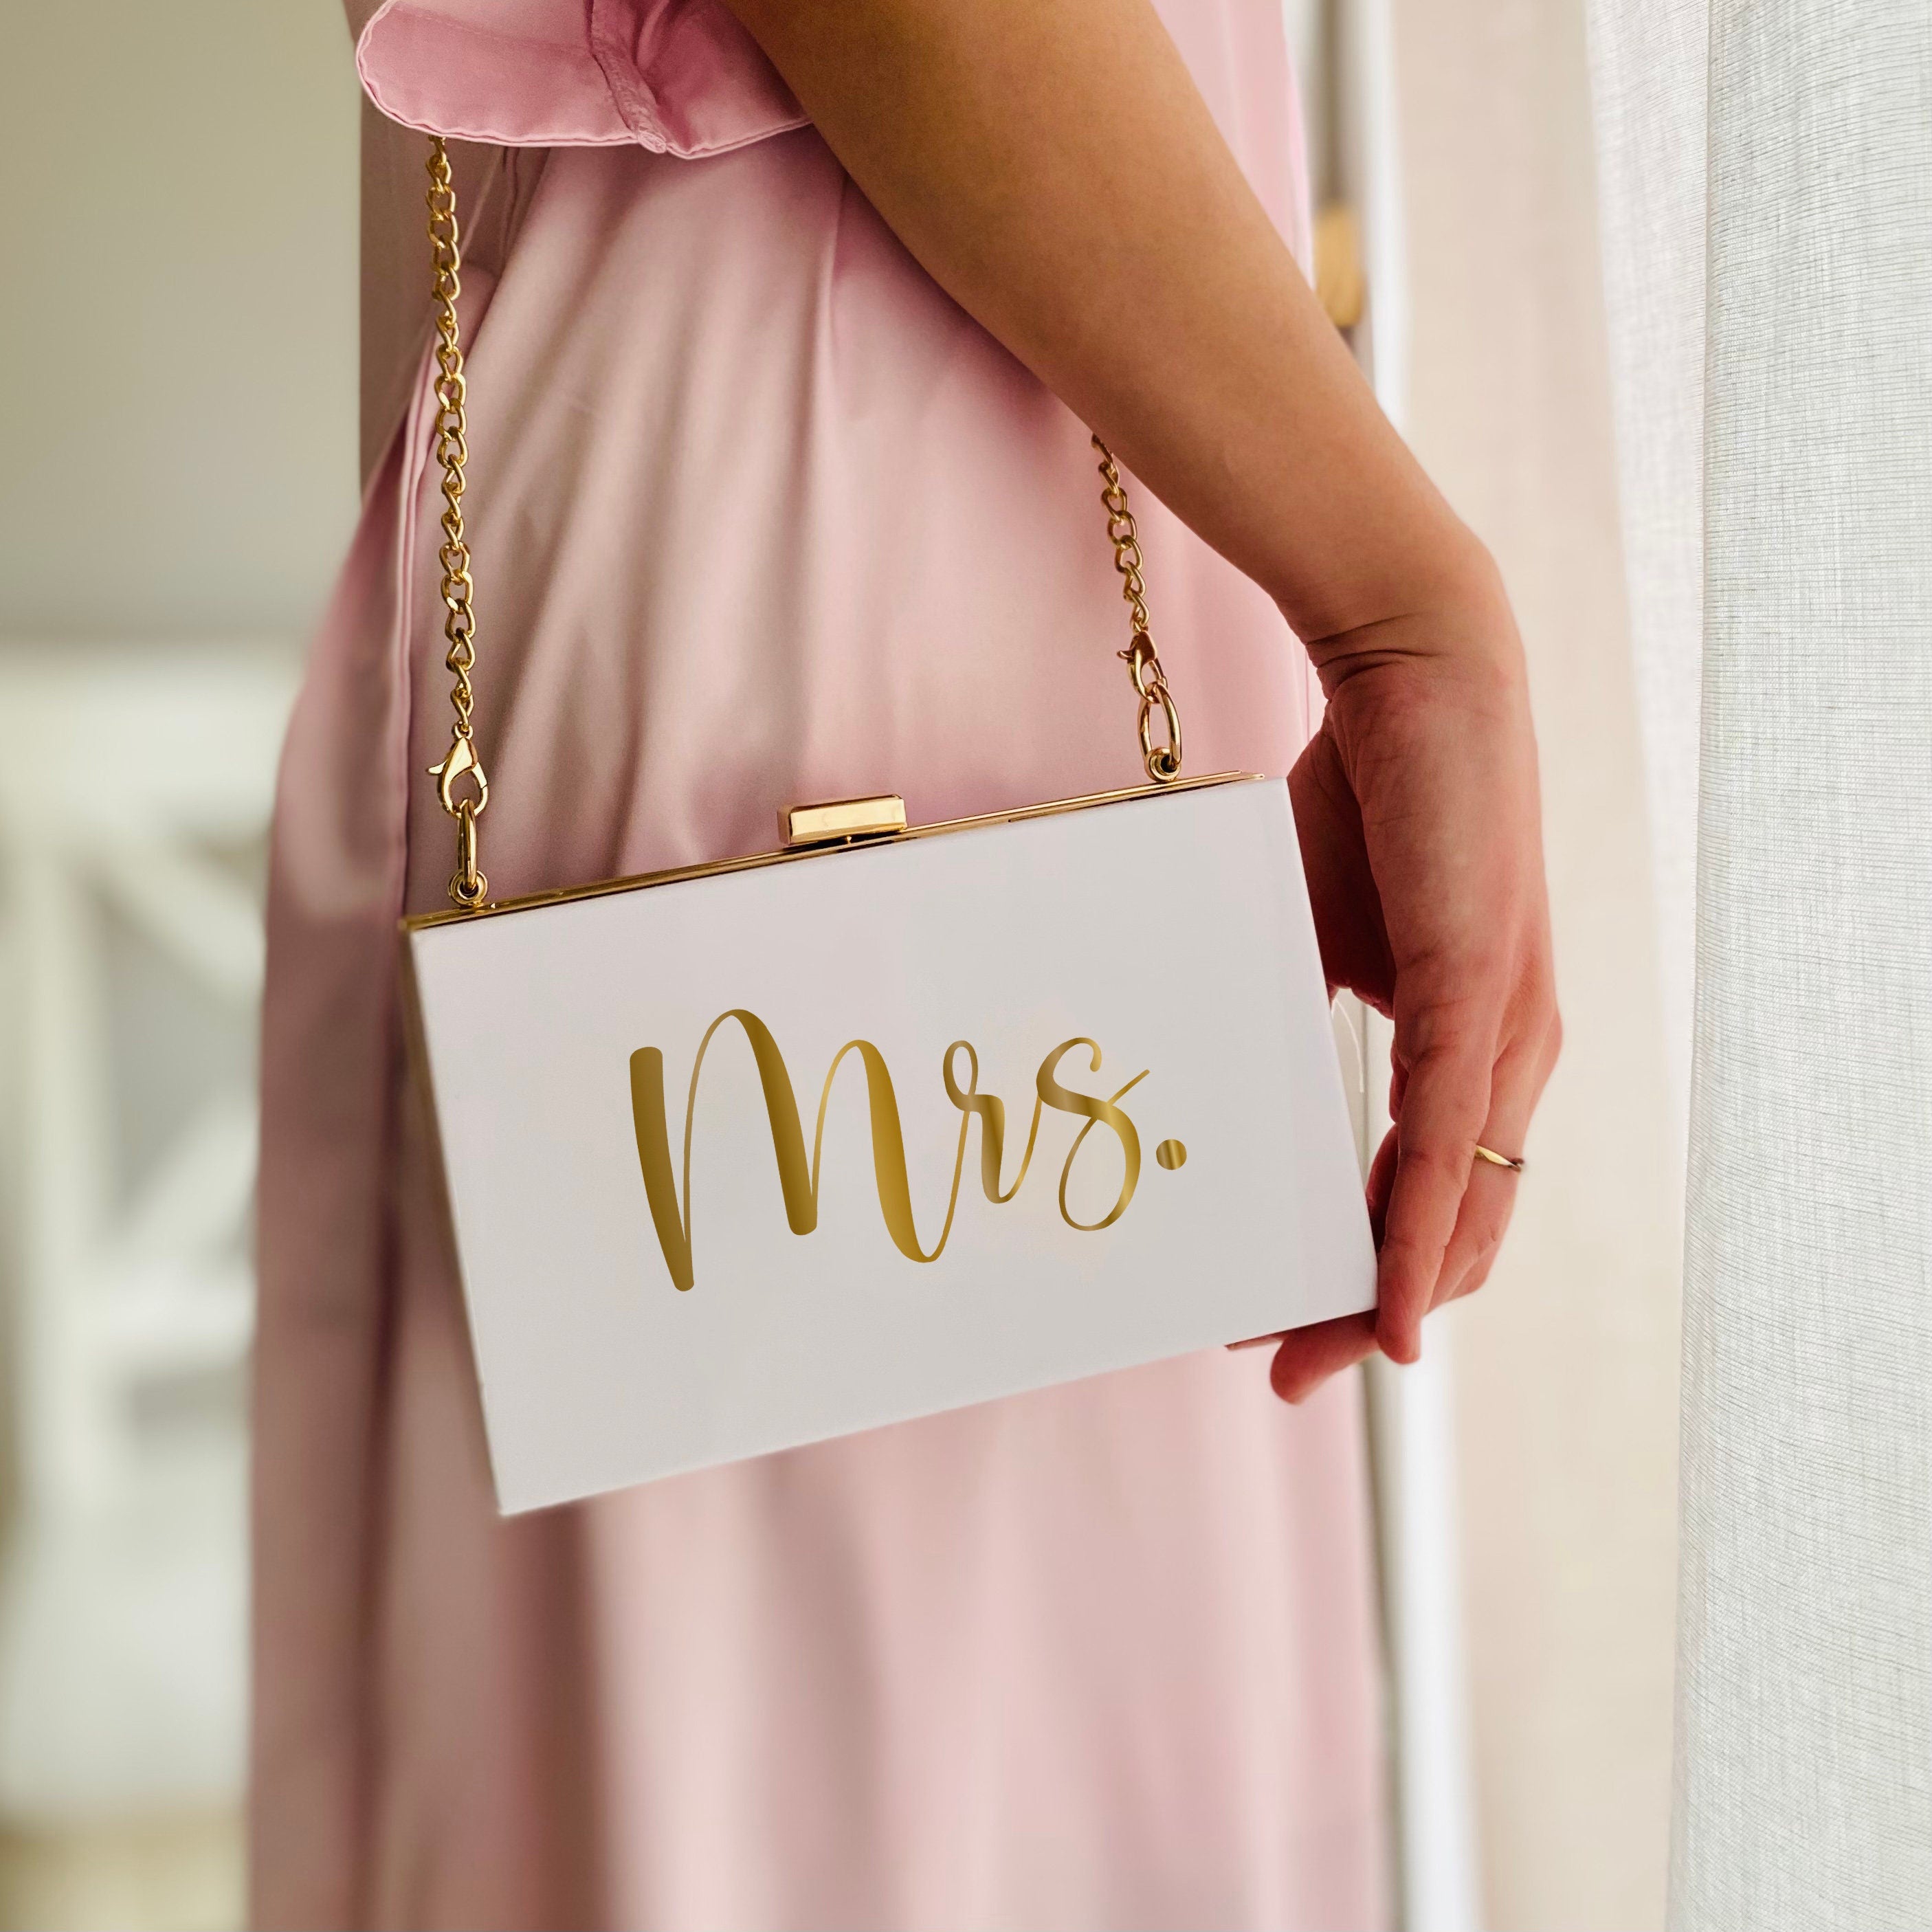 Mrs. Clutch Gift for Bride to Be, Future Mrs Wedding day accessory, Bride Purse